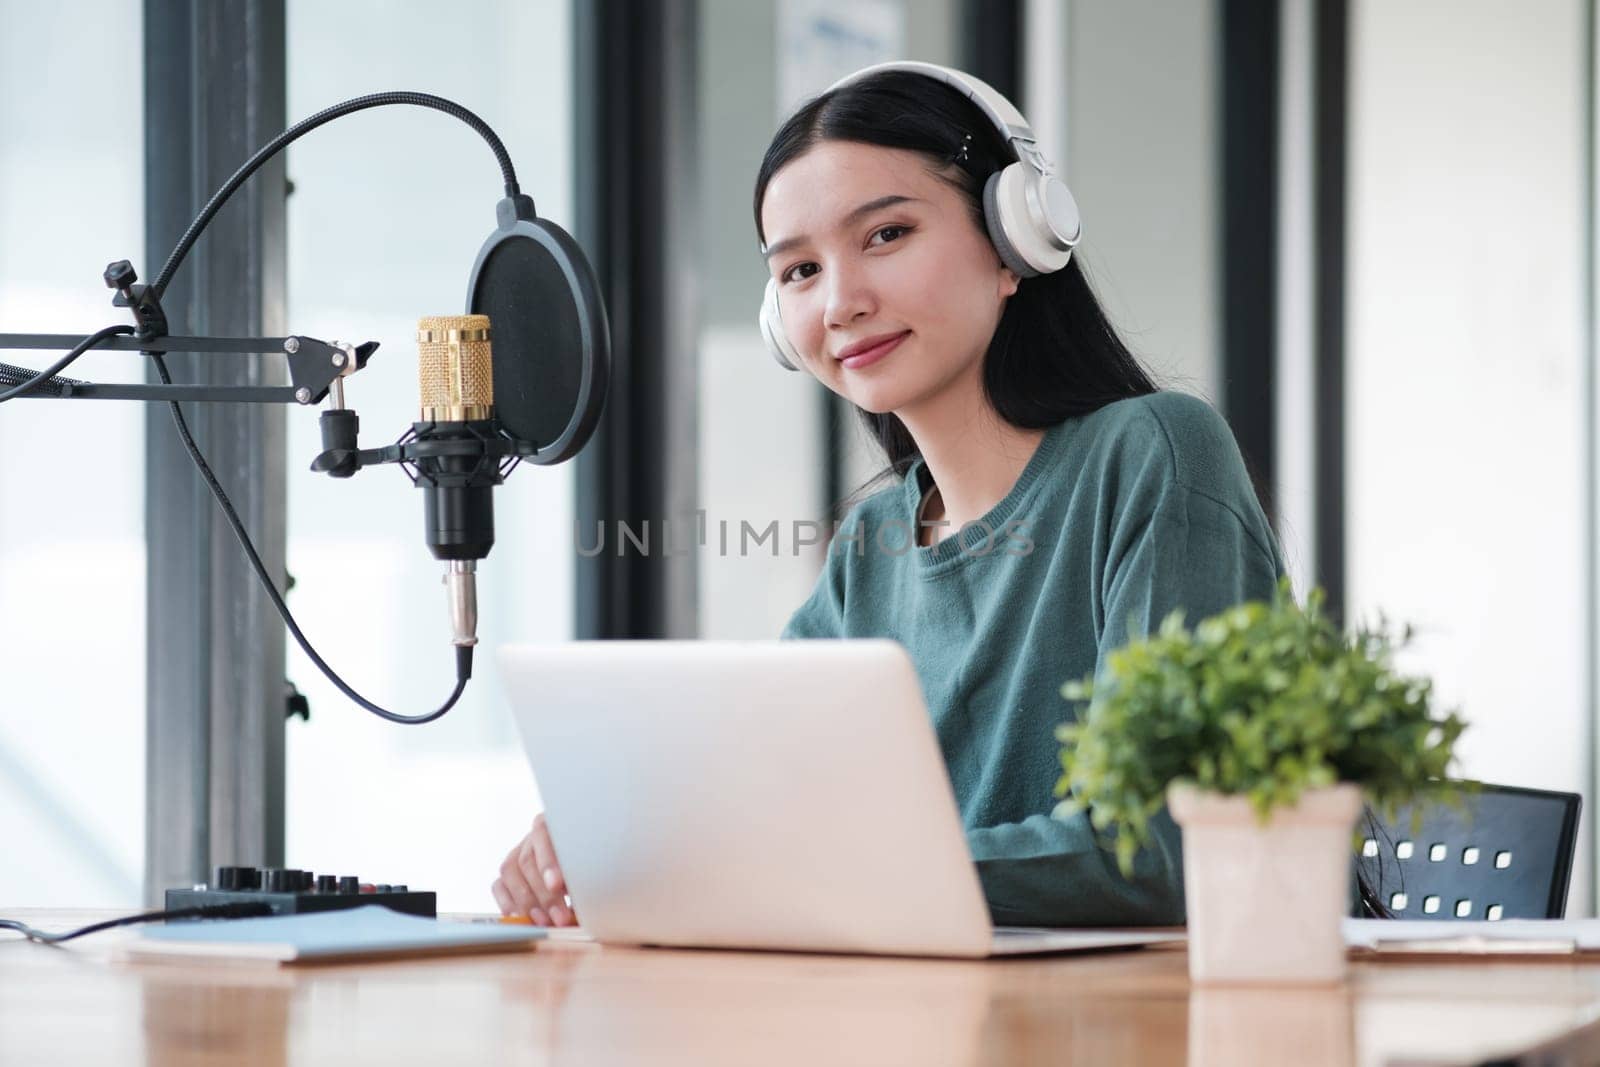 A woman is sitting at a desk with a laptop and a microphone. She is wearing headphones and smiling. The scene suggests that she is working on a project or recording something